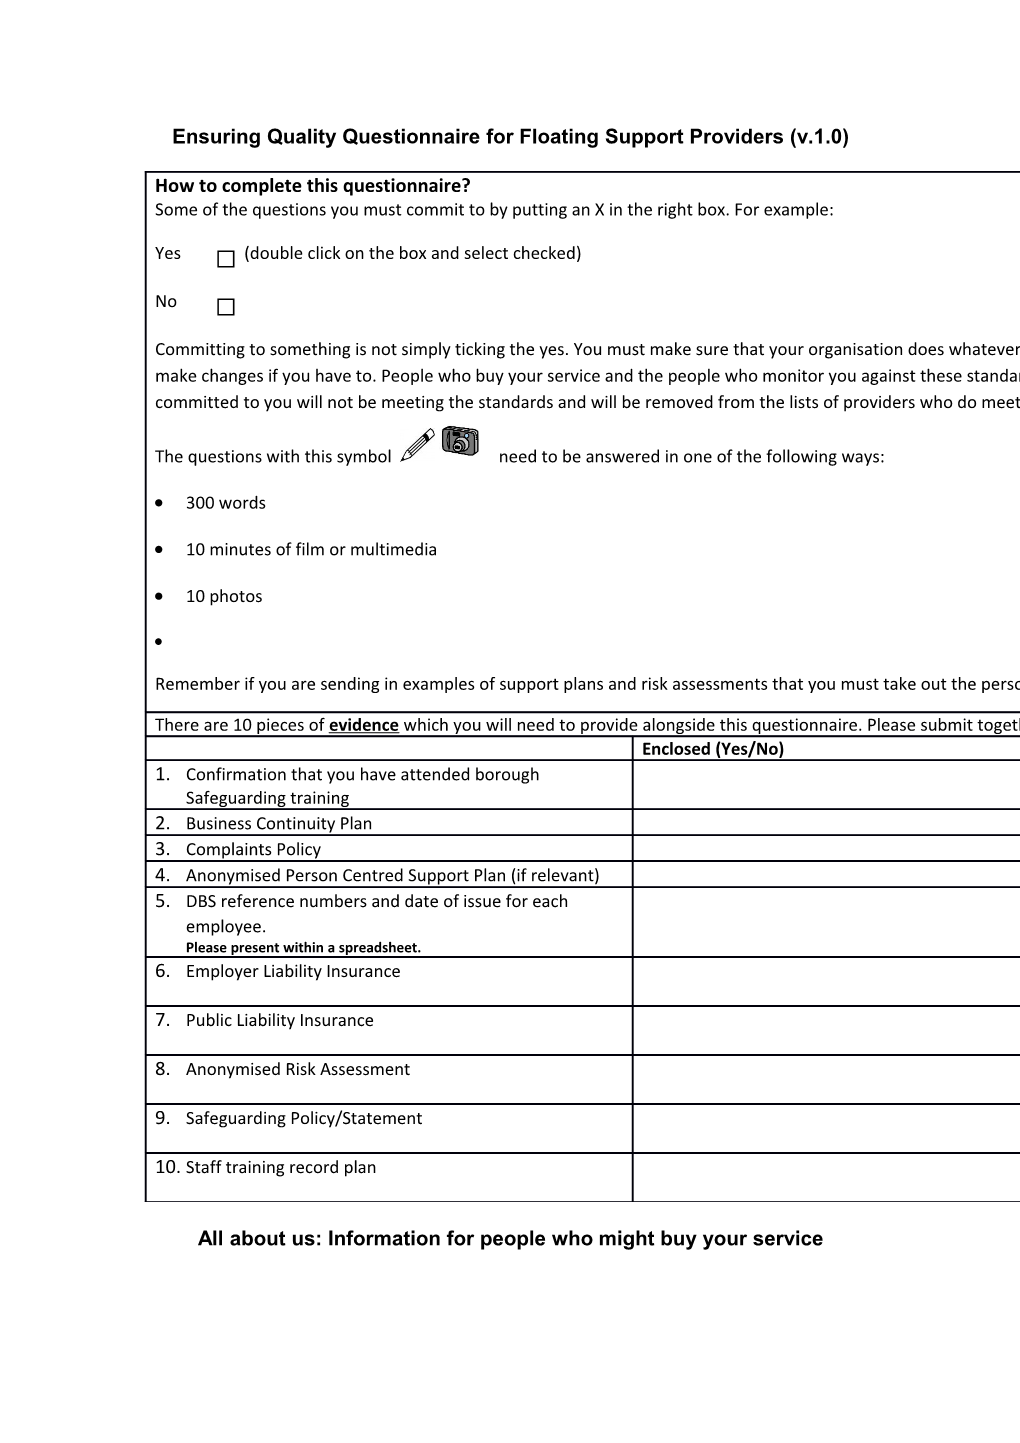 Ensuring Quality Questionnaire for Floating Support Providers (V.1.0)